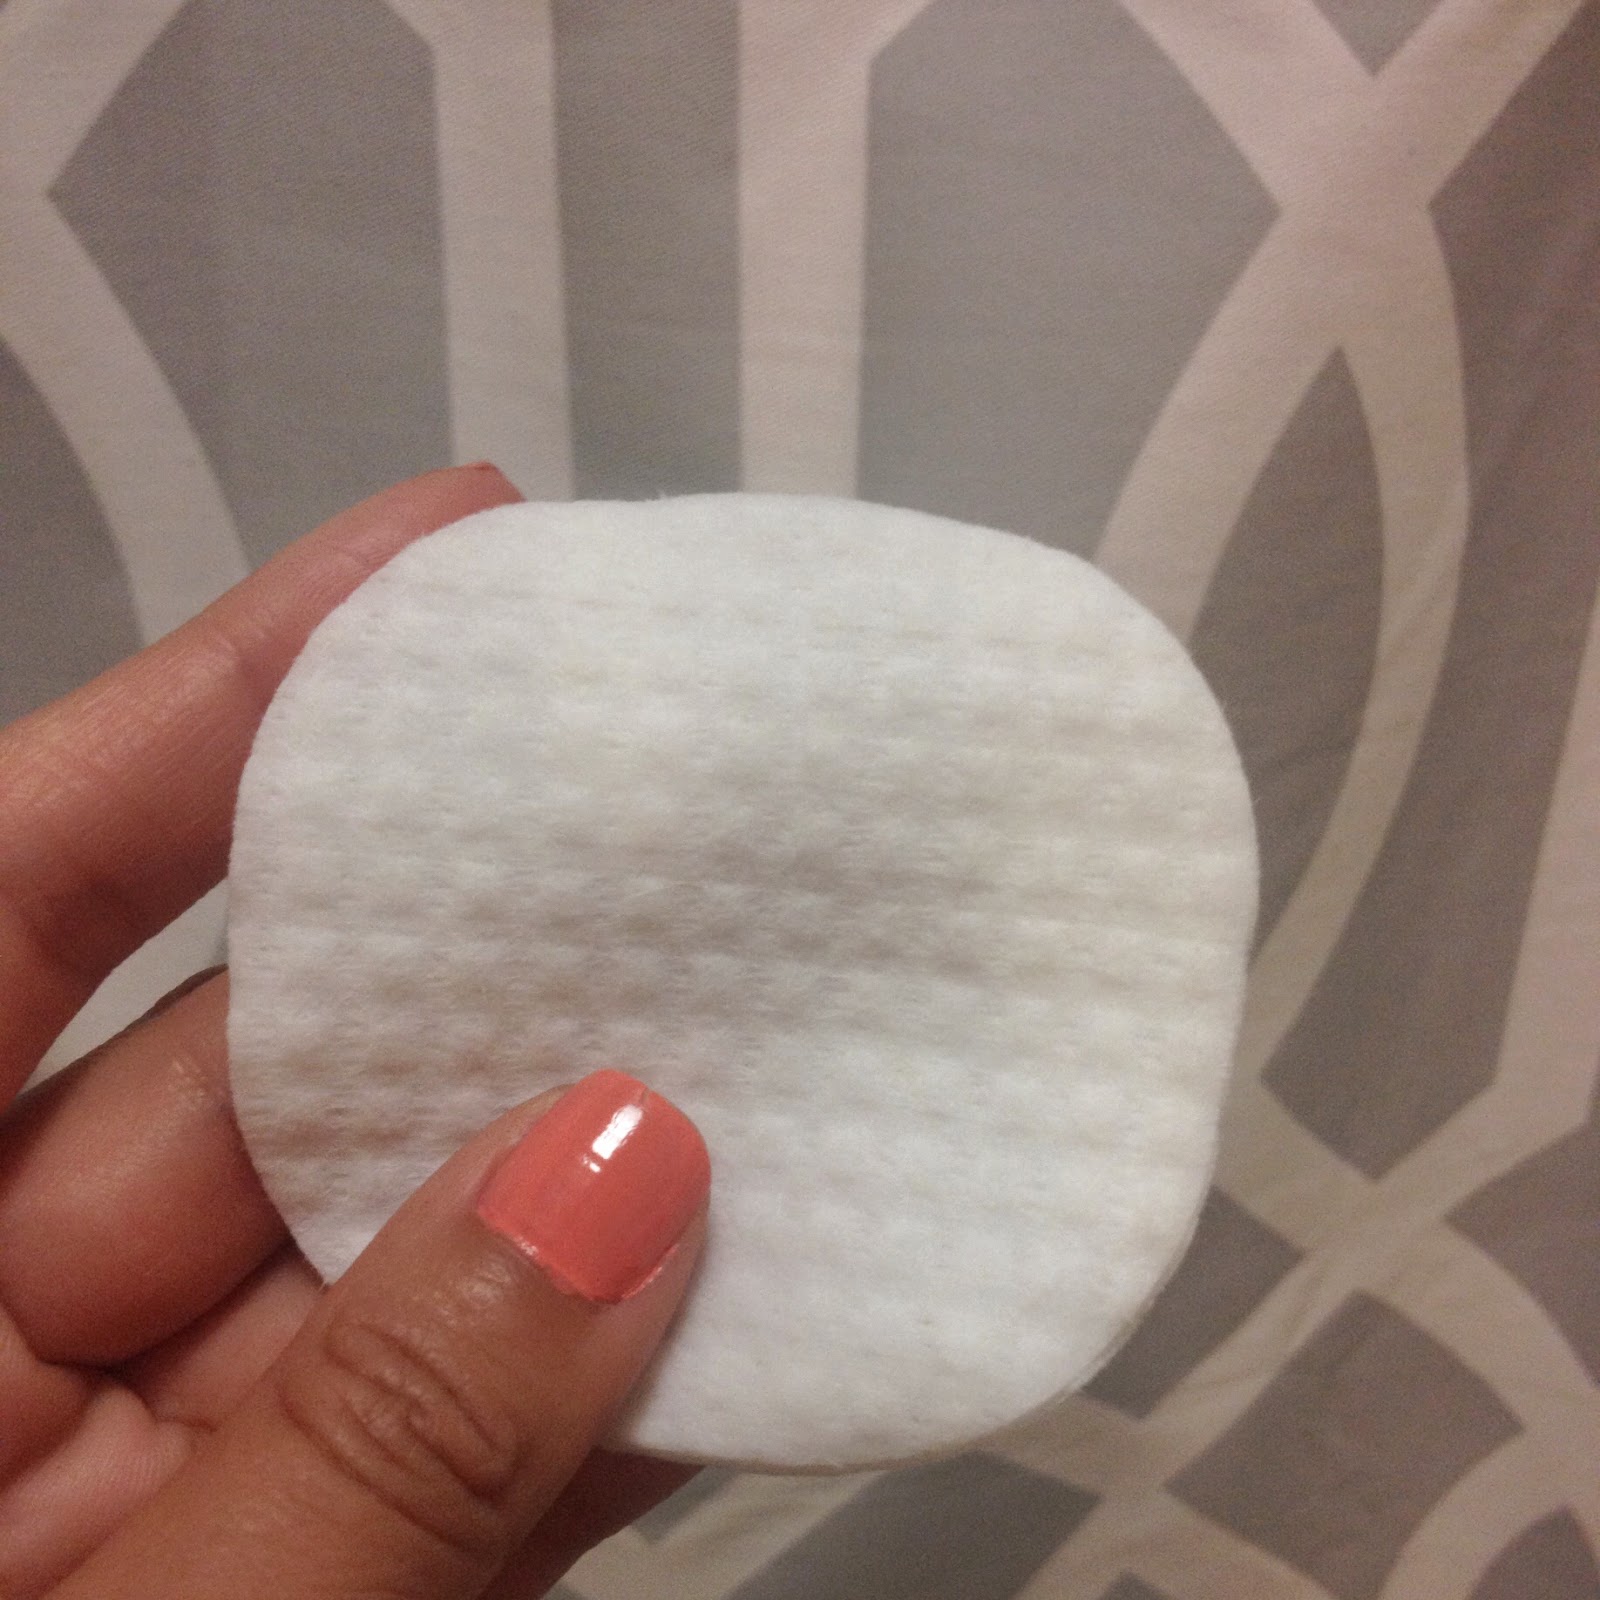 Simple Eye Make-up Remover Pads Review, skincare product review, san diego beauty blogger